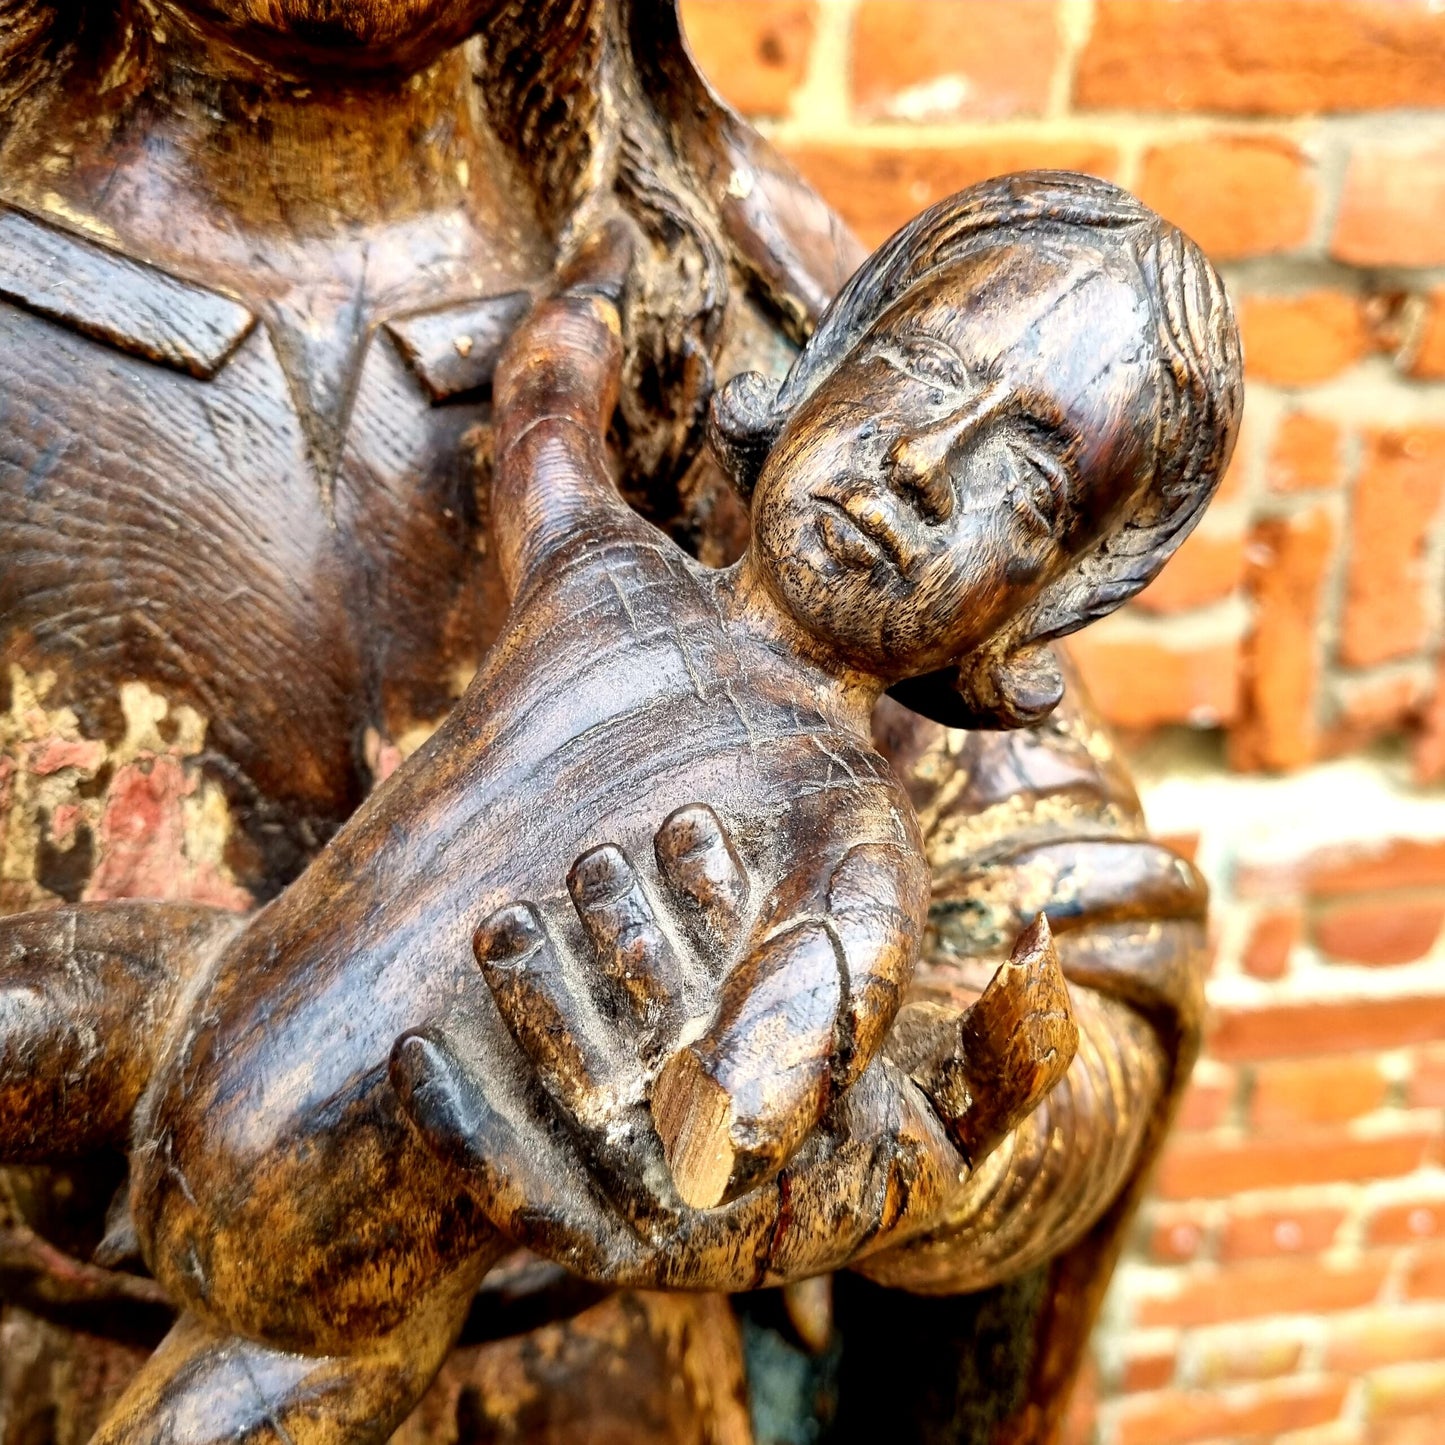 Large & Impressive Early 17th Century Antique Carved Walnut Sculpture of the Madonna & Child